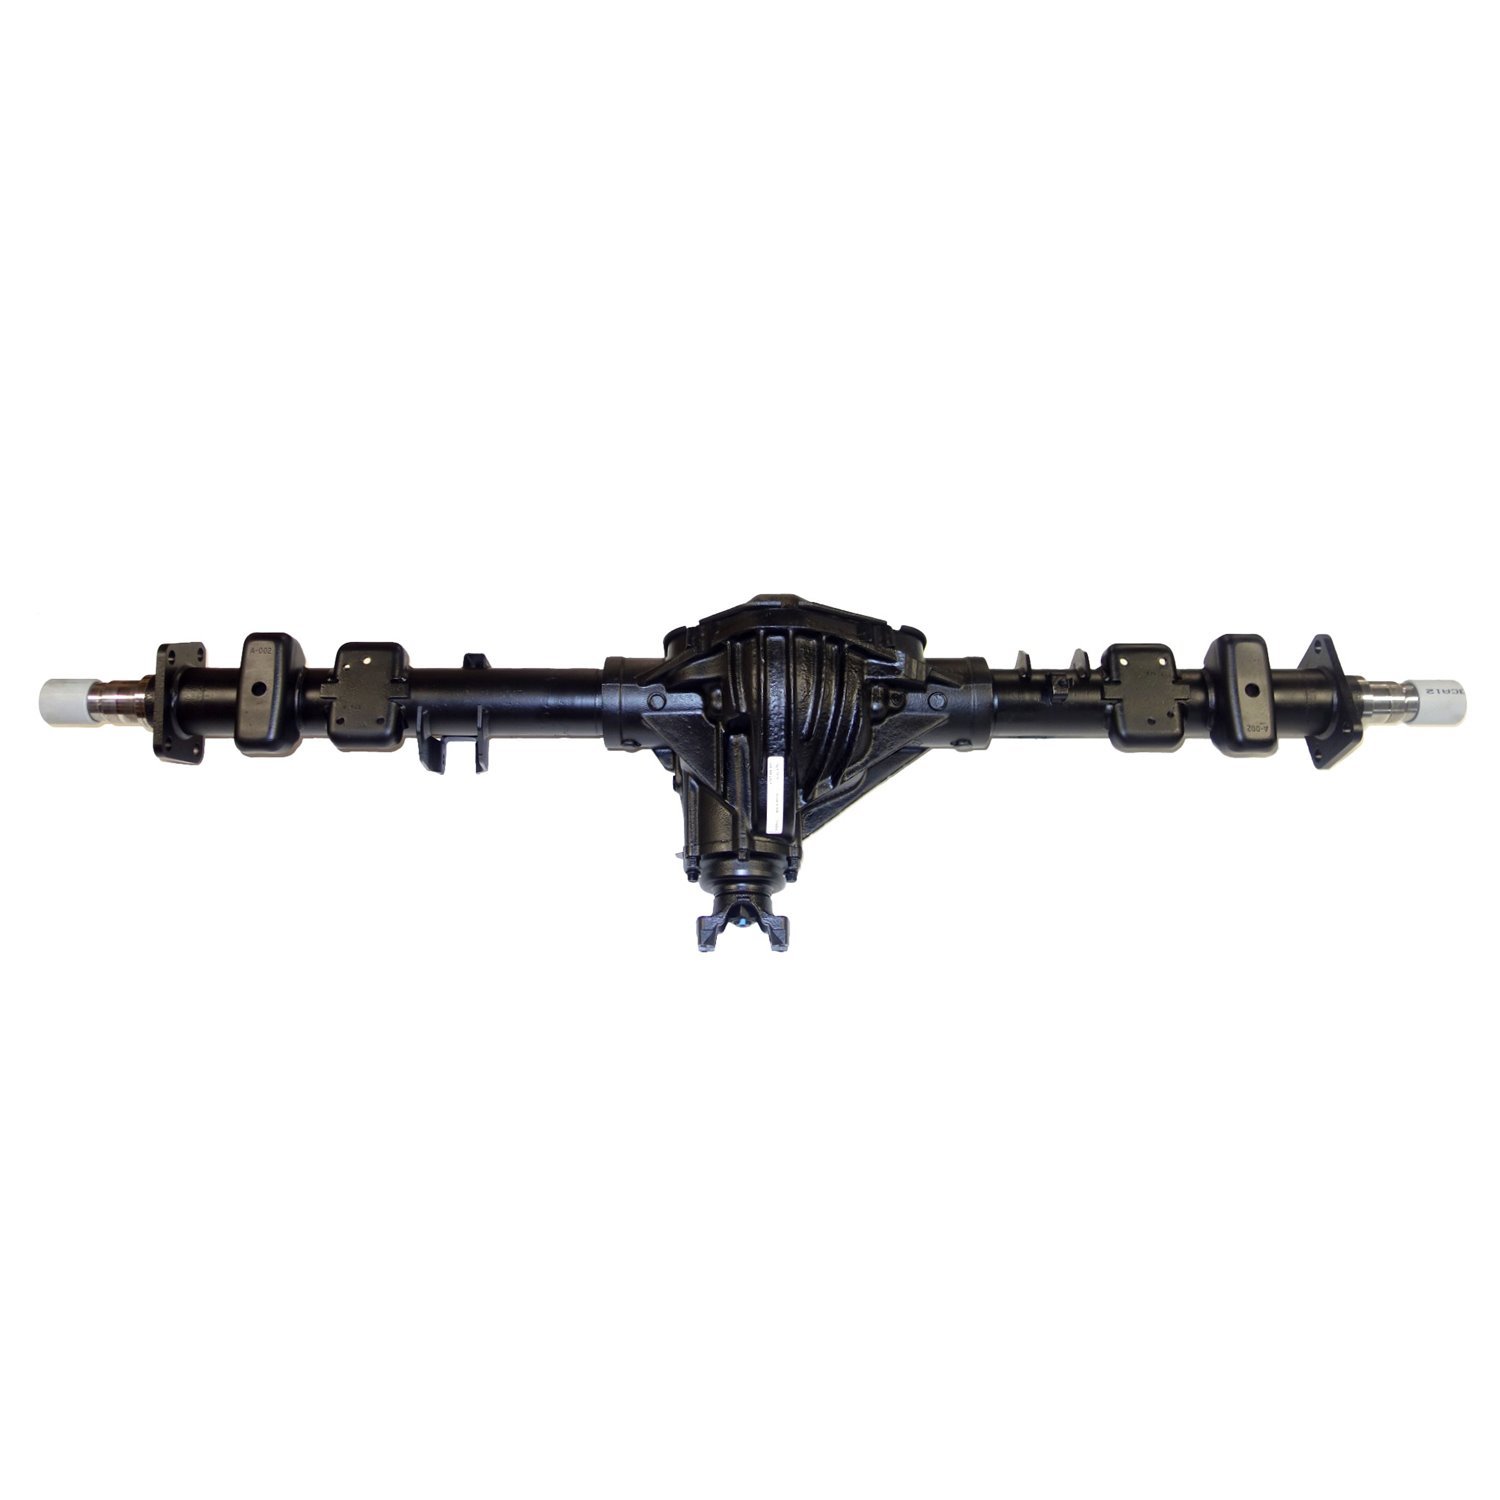 Remanufactured Axle Assy for GM 14 Bolt Truck 90-00 GM 3500 Pickup 3.42 , 2wd, SRW